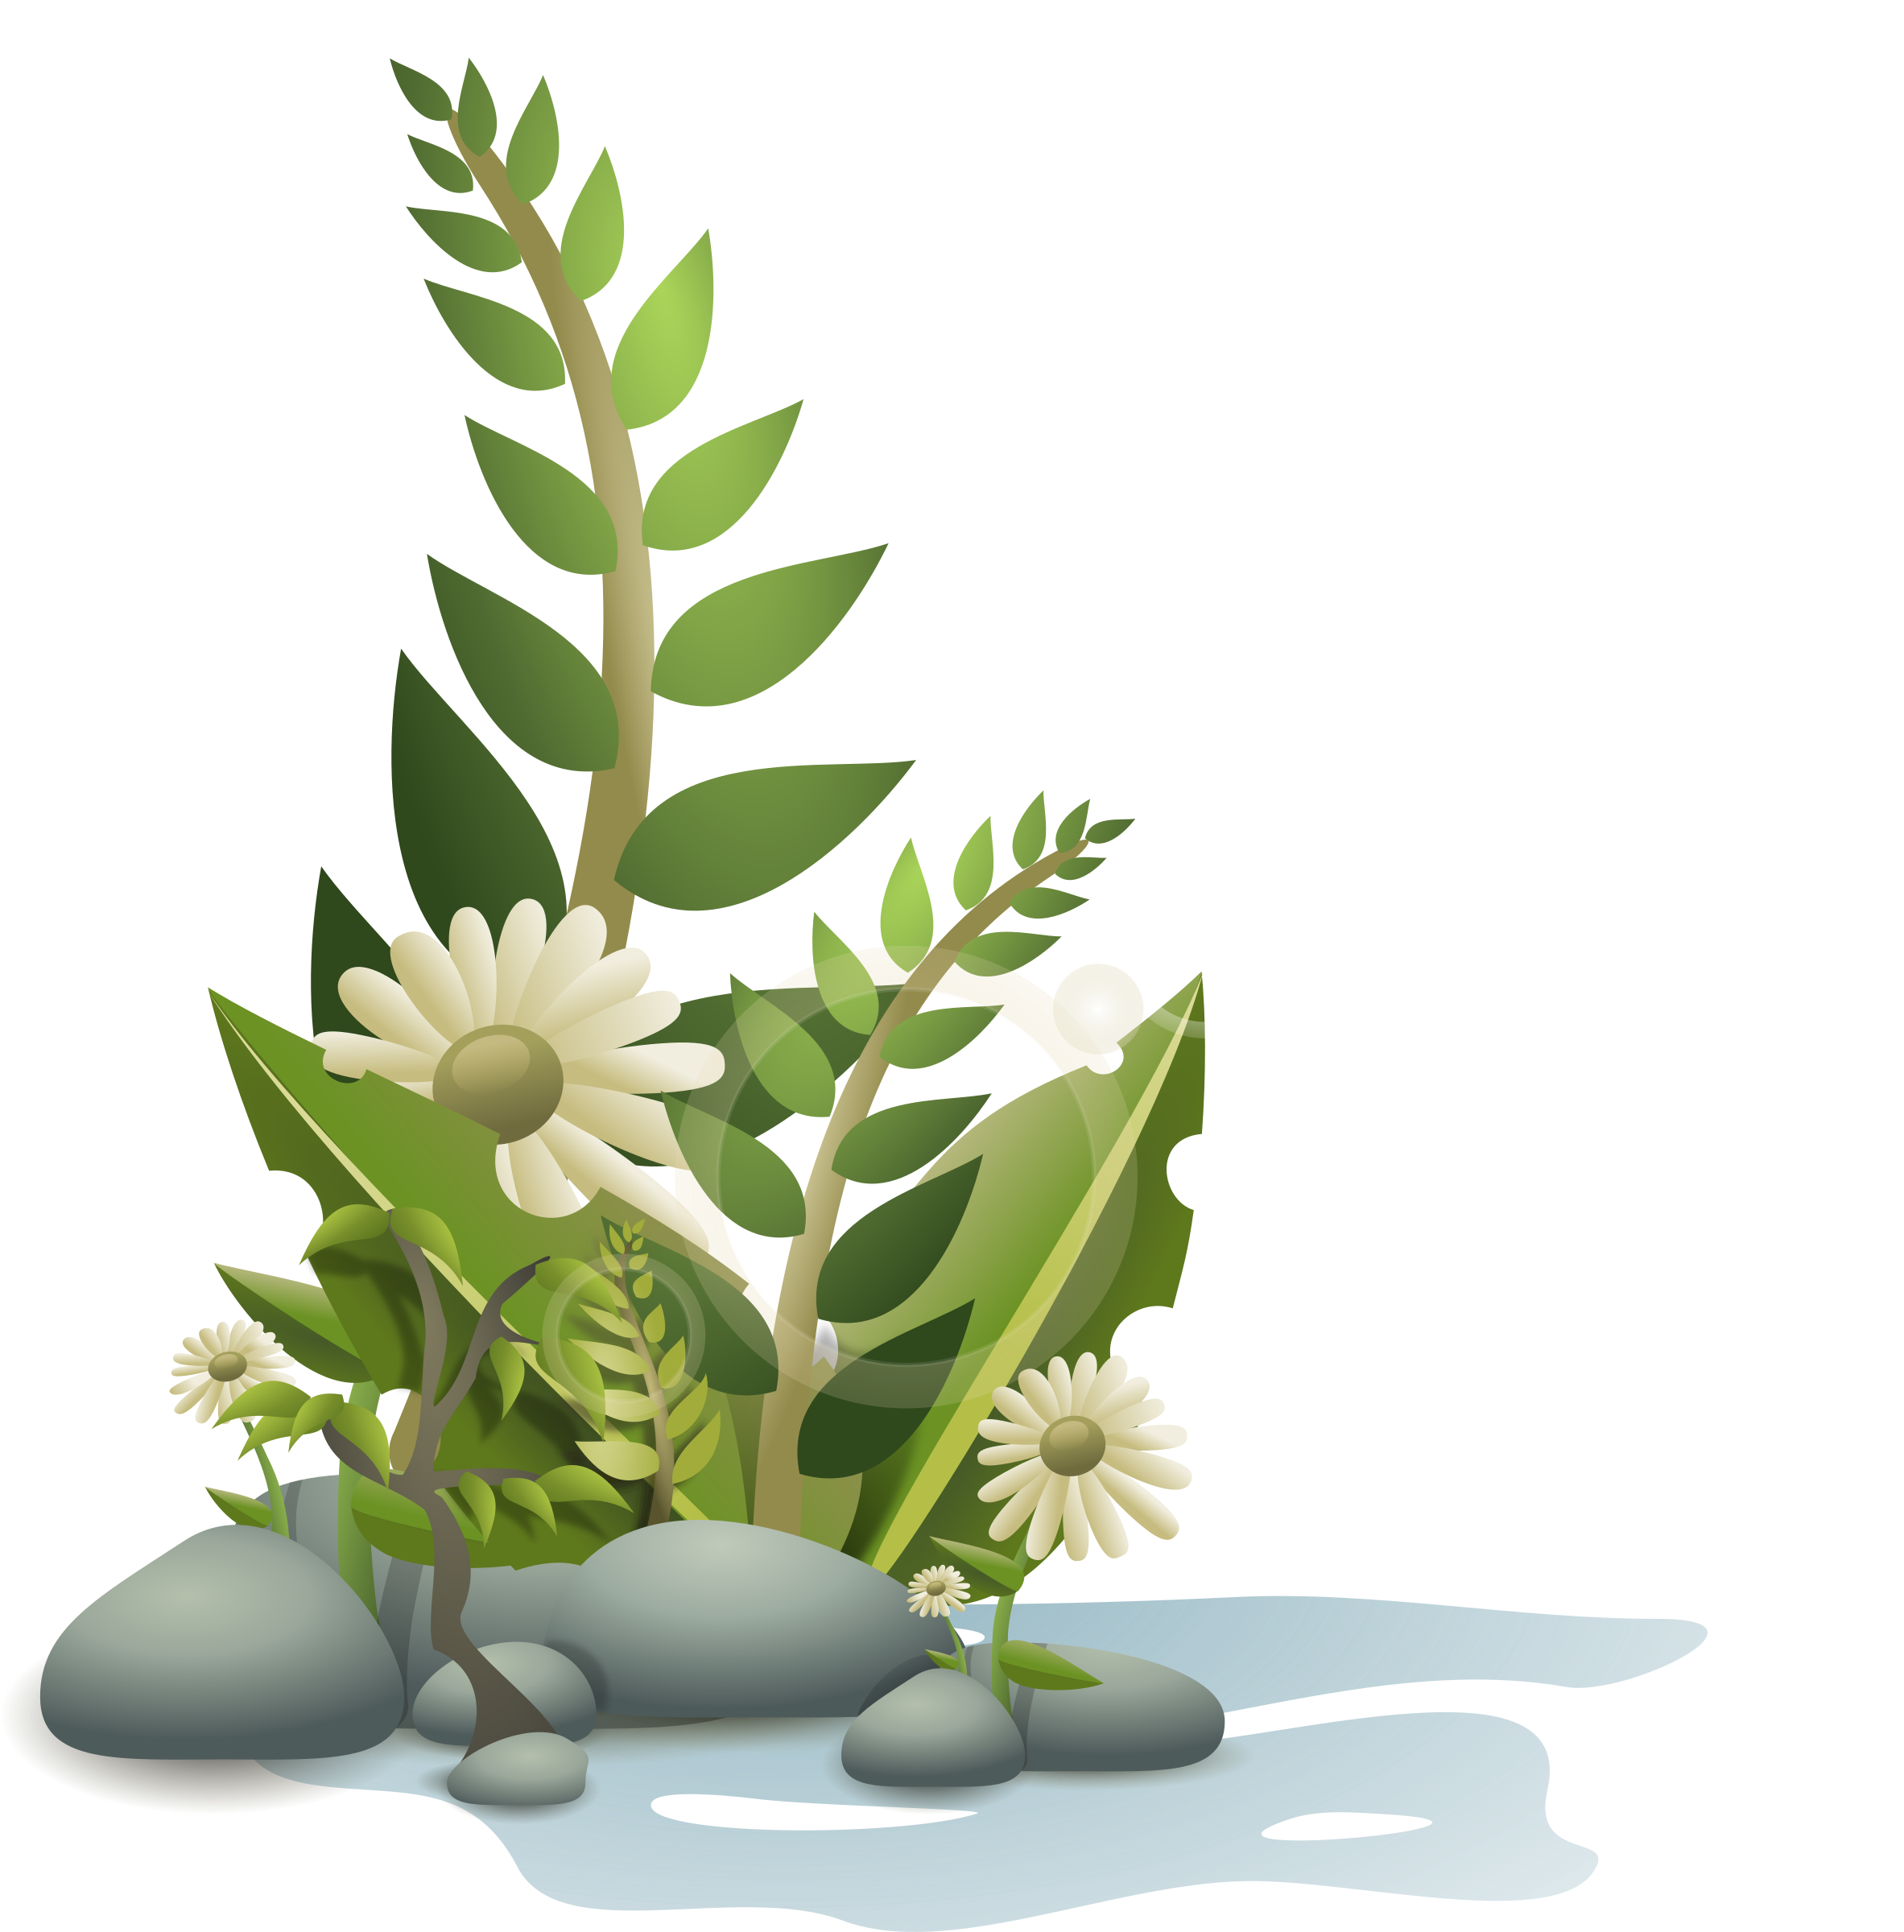 Flowers clipart root. Plants pebbles and by